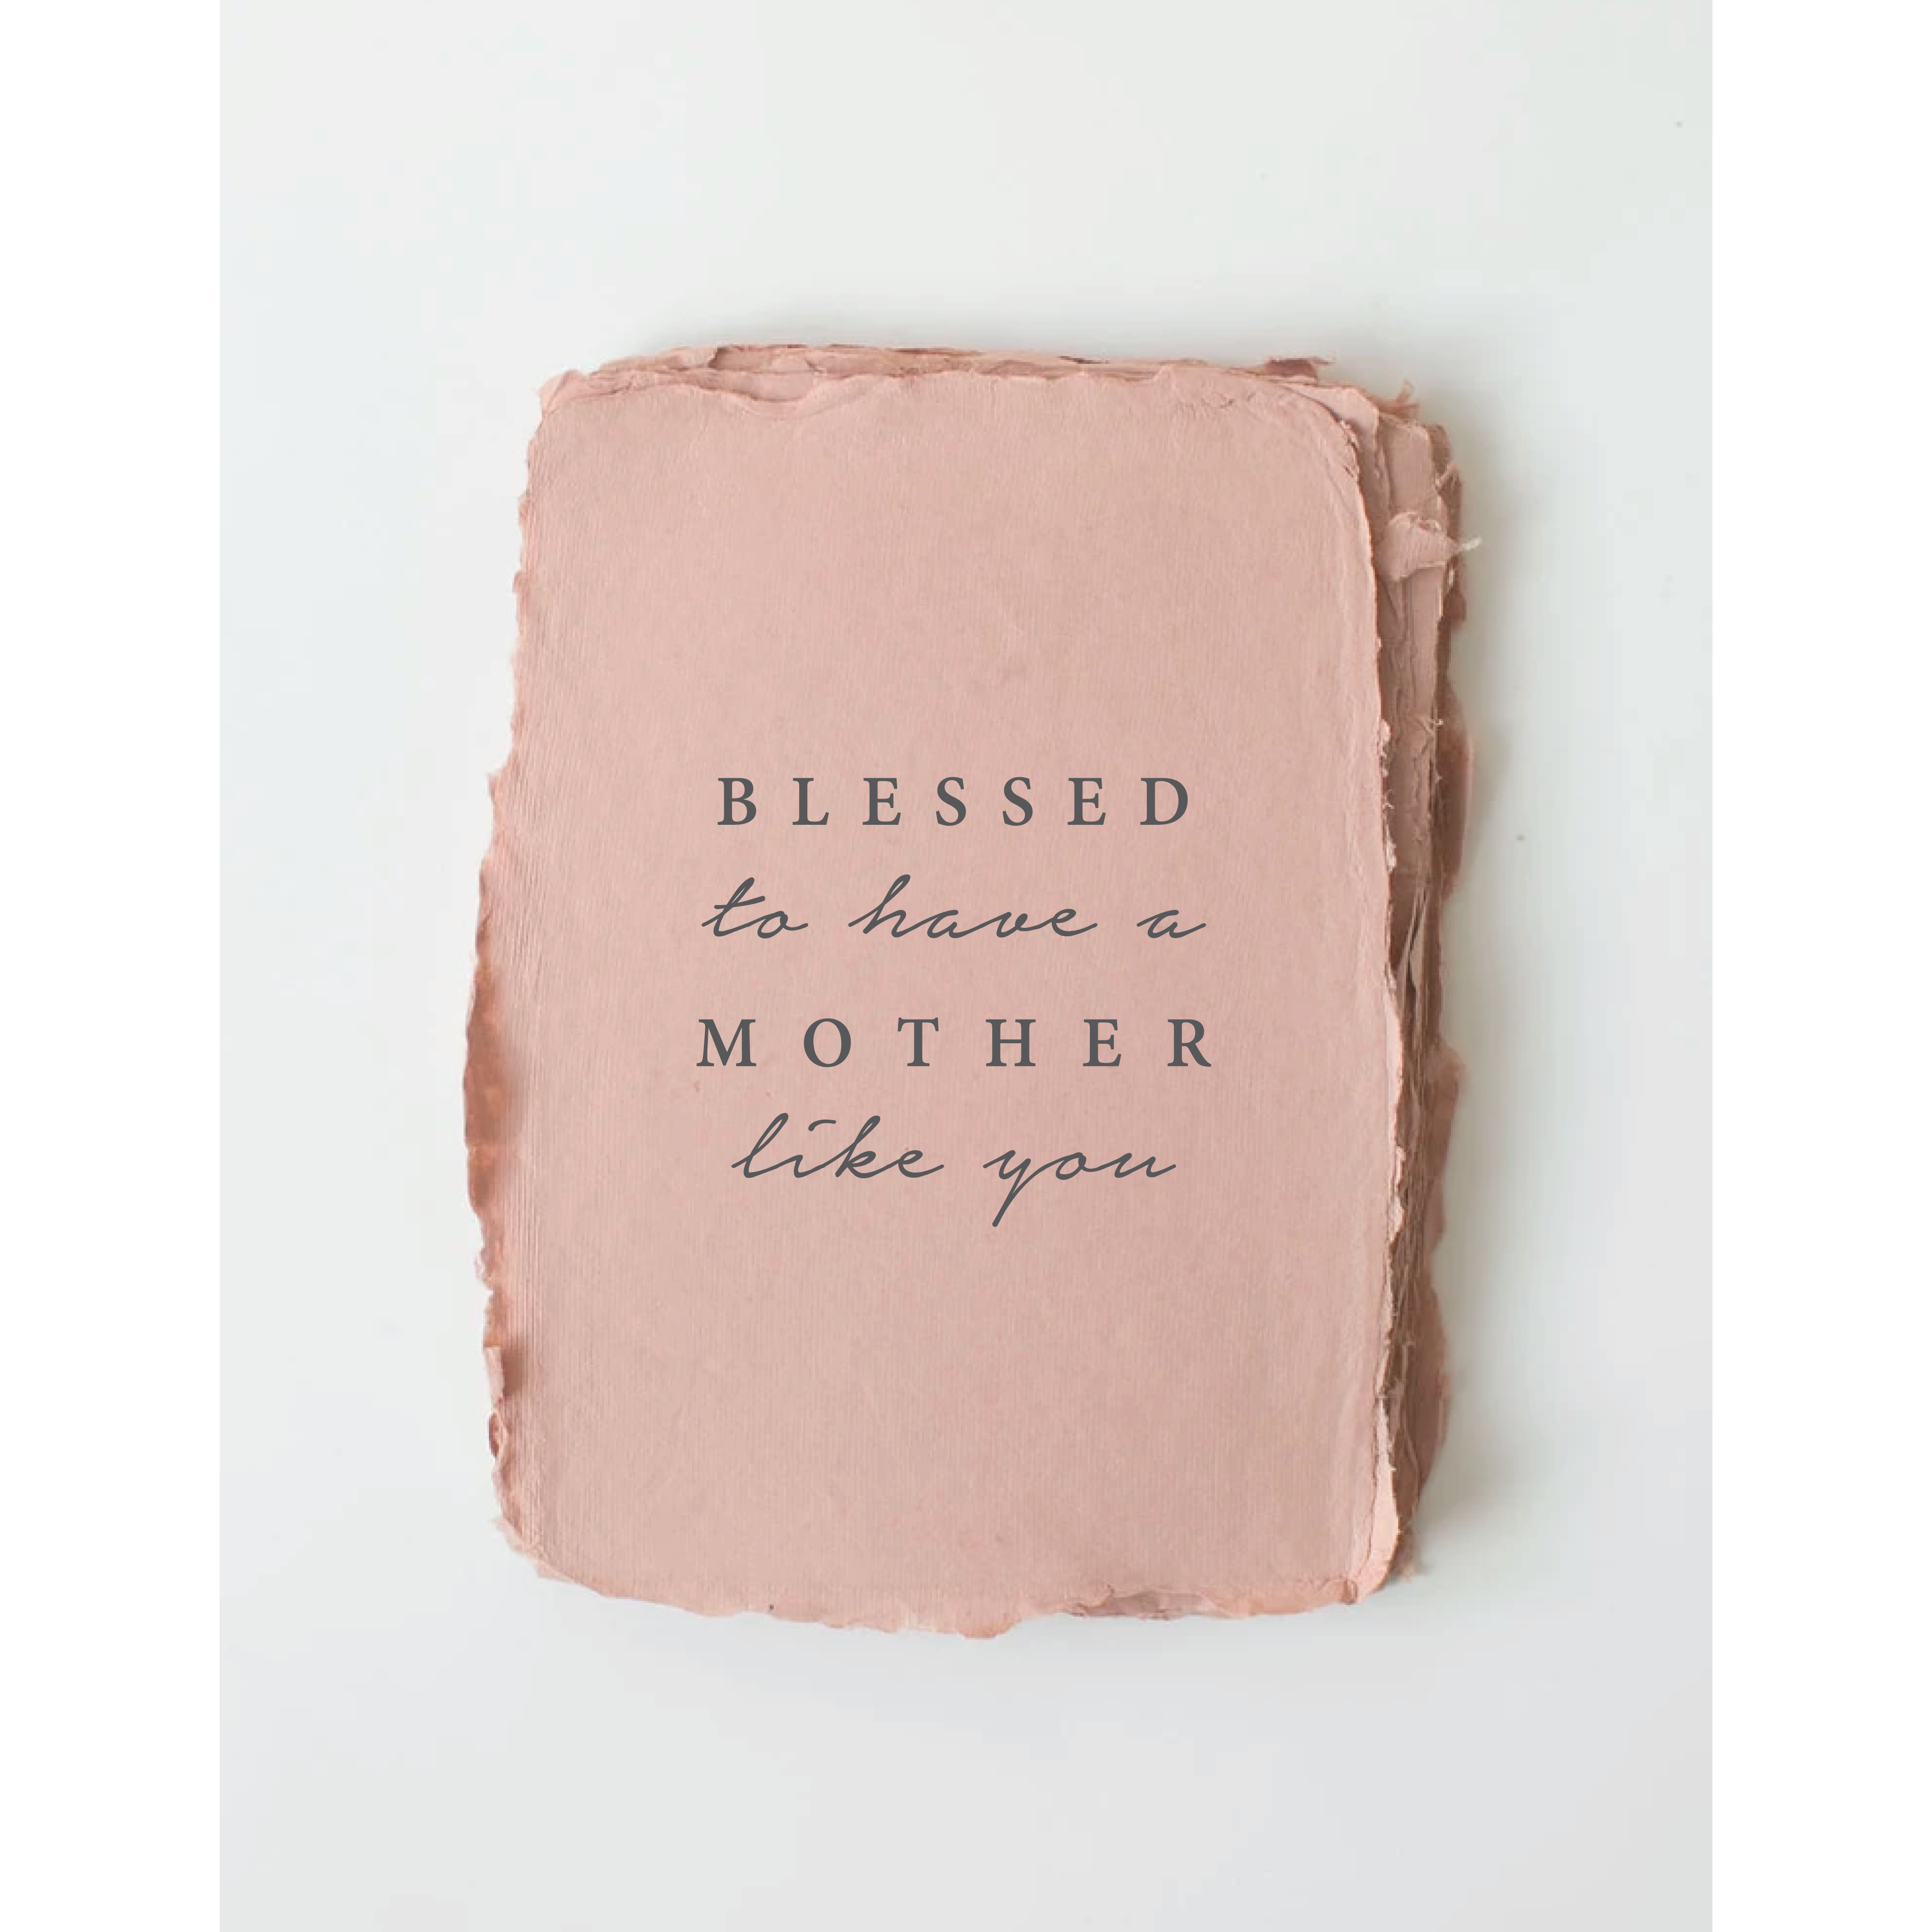 "Blessed to have a mother like you" Mother's Day Card